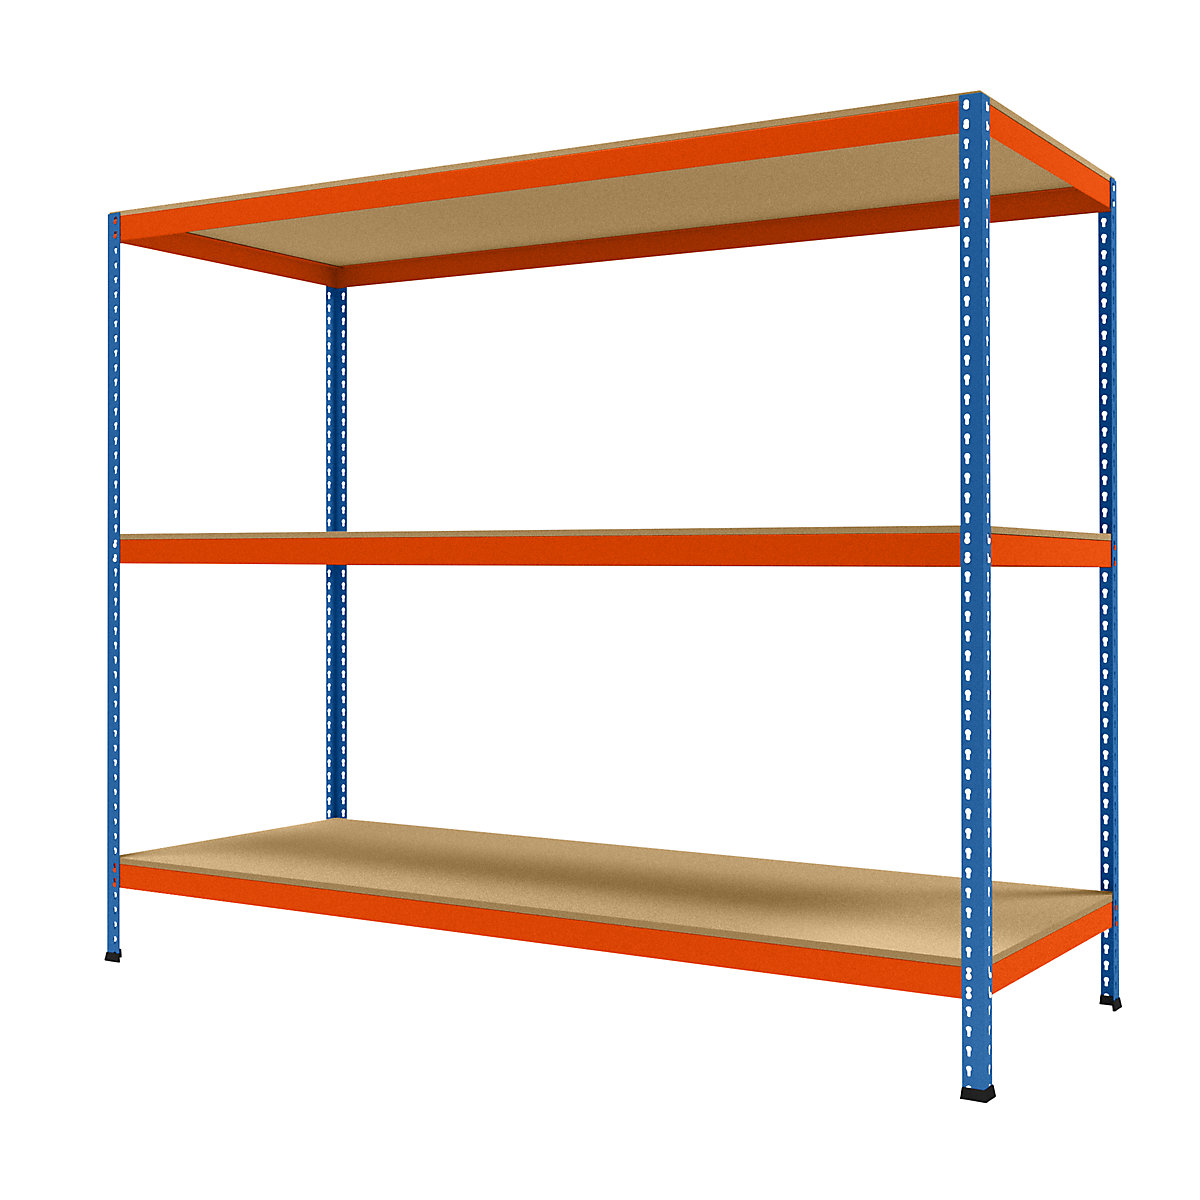 Wide span heavy duty shelving, height 1981 mm, overall depth 926 mm, width 2450 mm